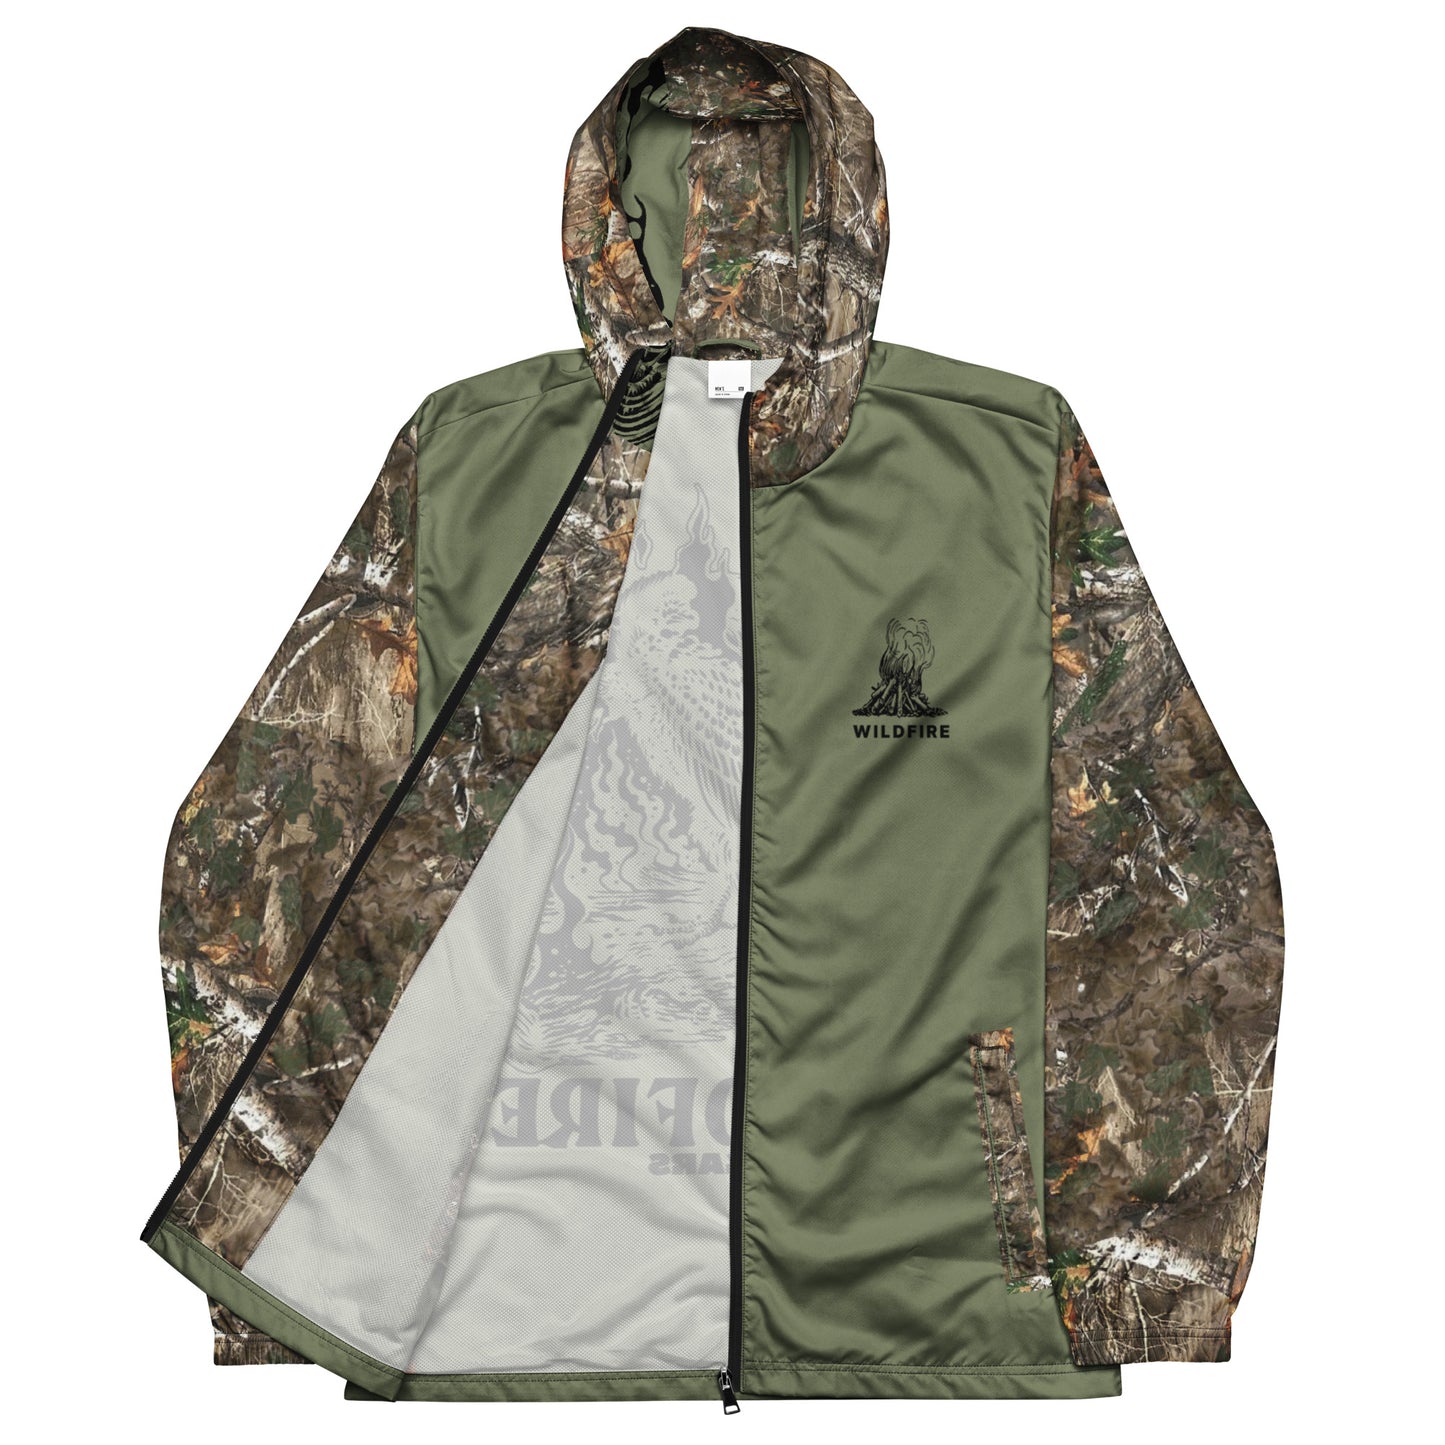 Wildfire Cigars Camouflage and green vulture windbreaker facing the front